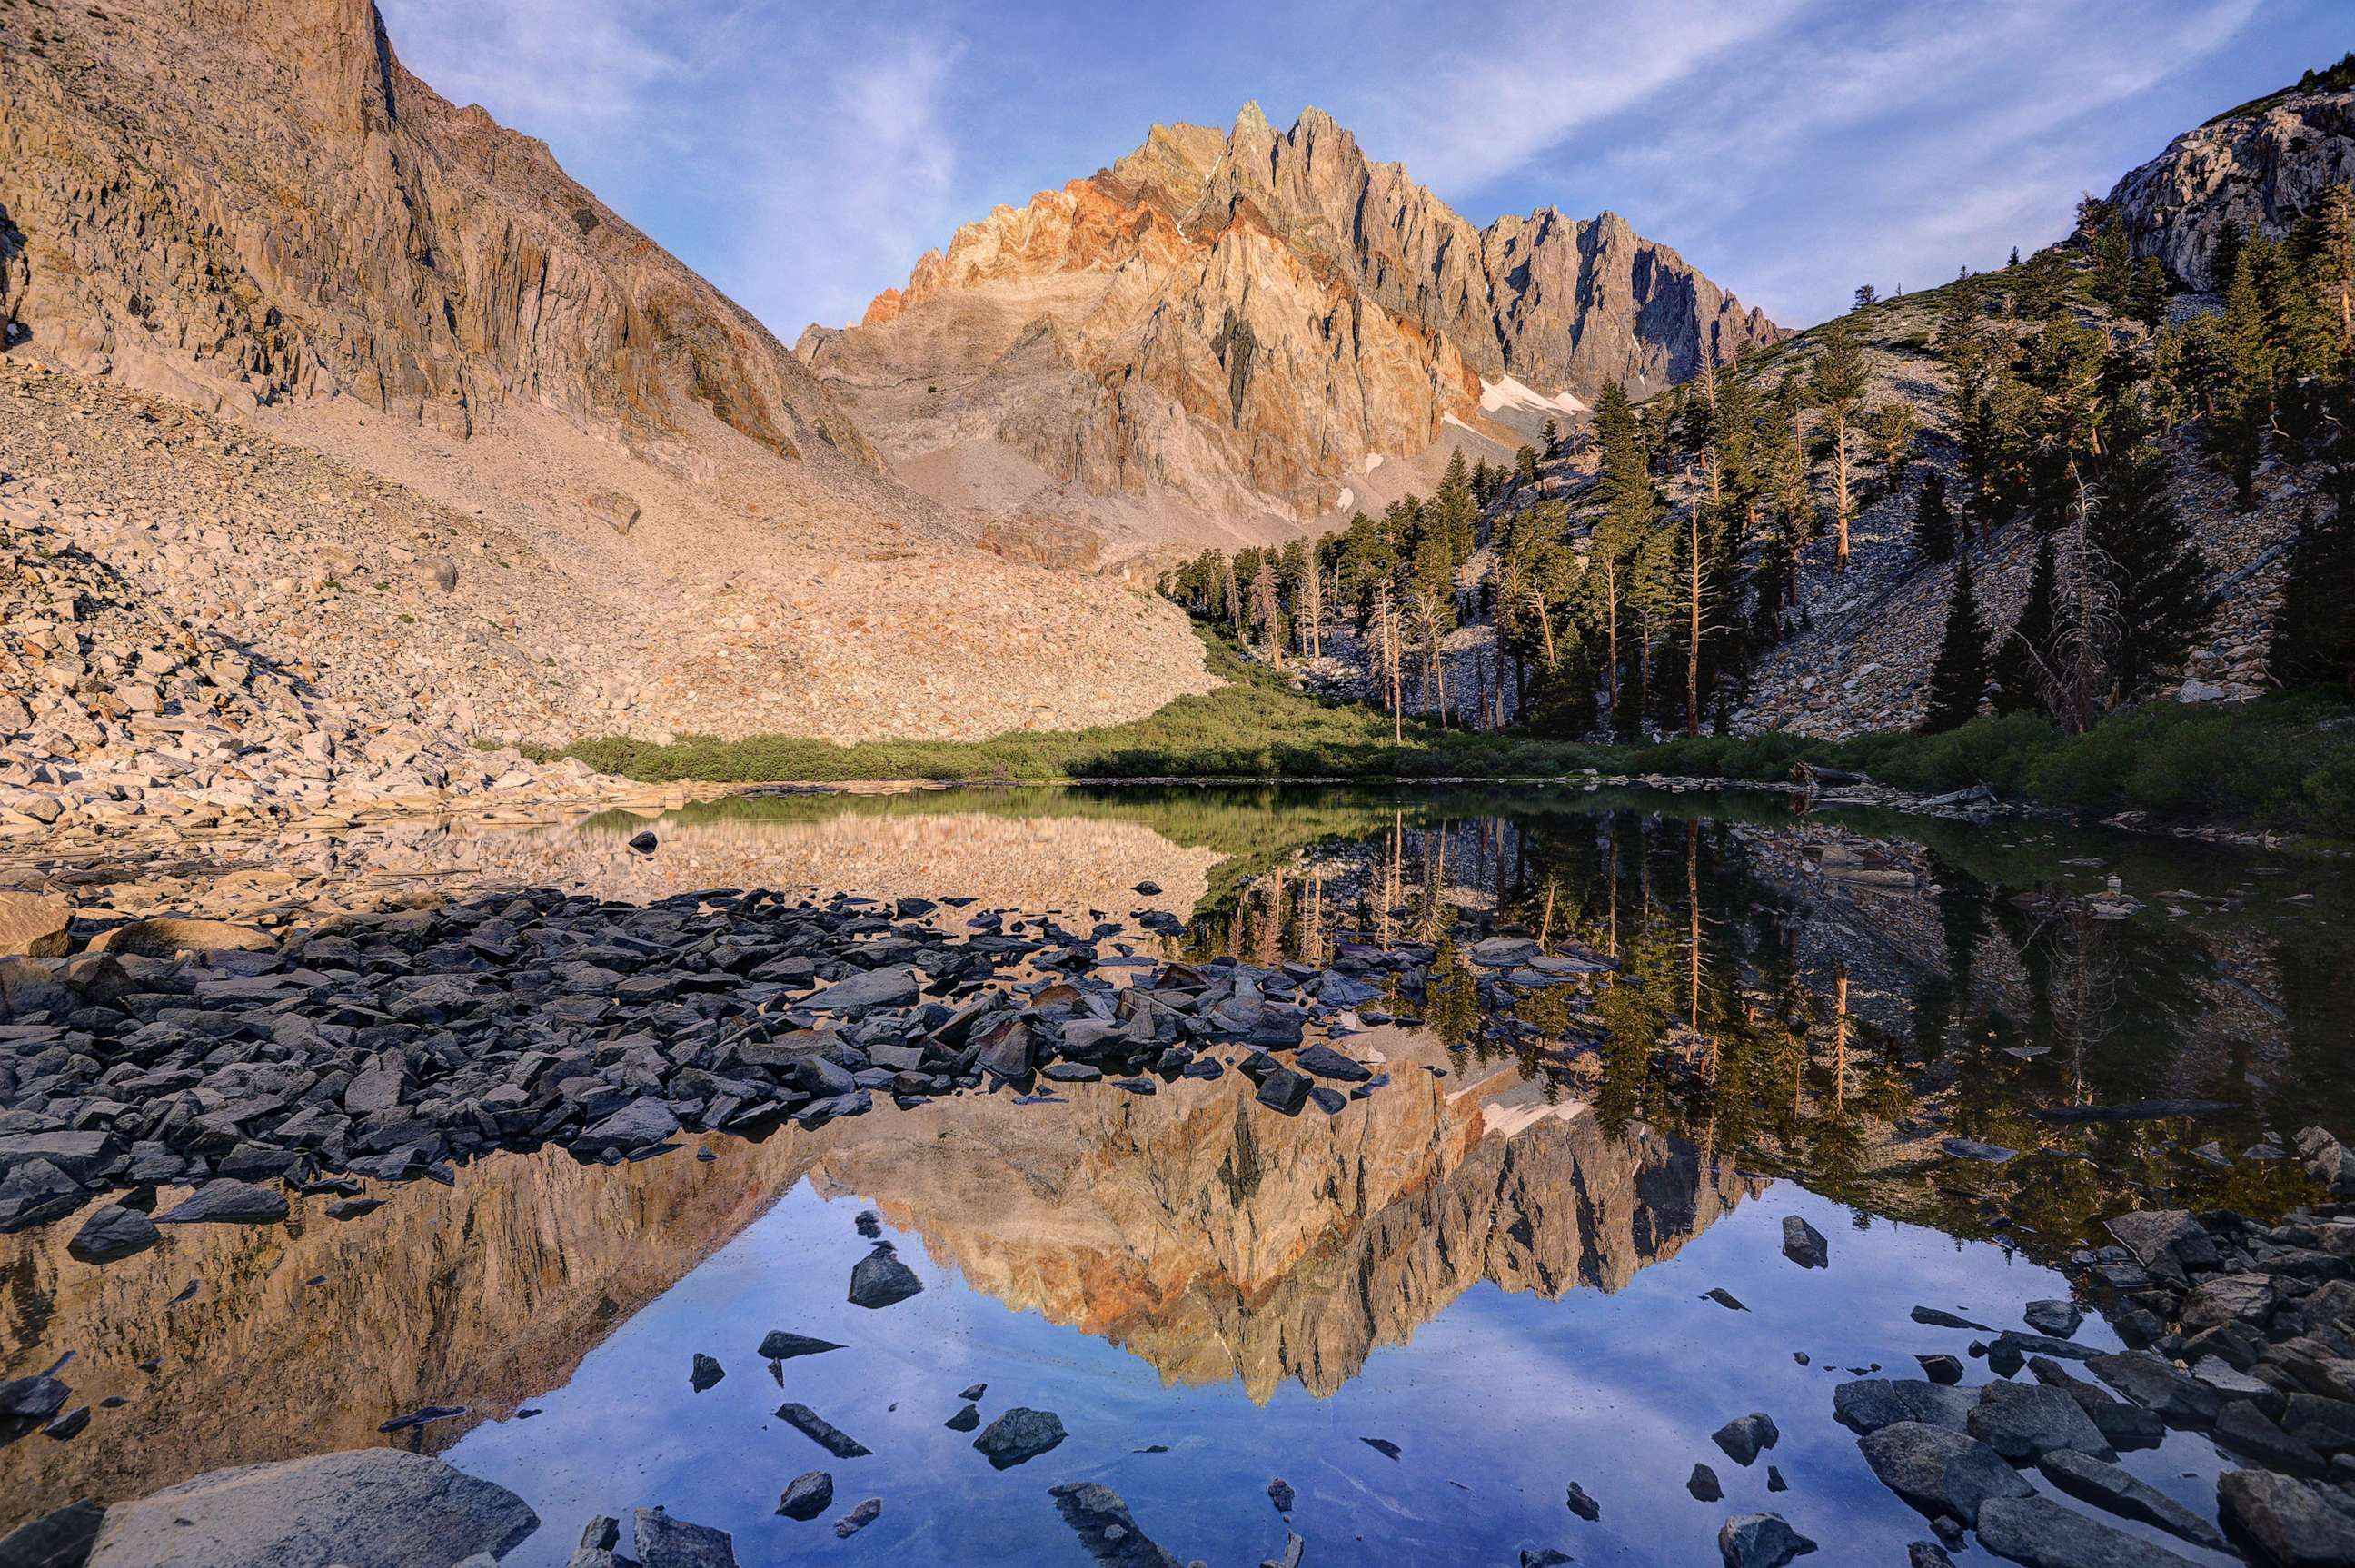 PHOTO: Pictured in this undated stock images is Red Lake and Split Mountain, in the Sierra Nevada range in California.